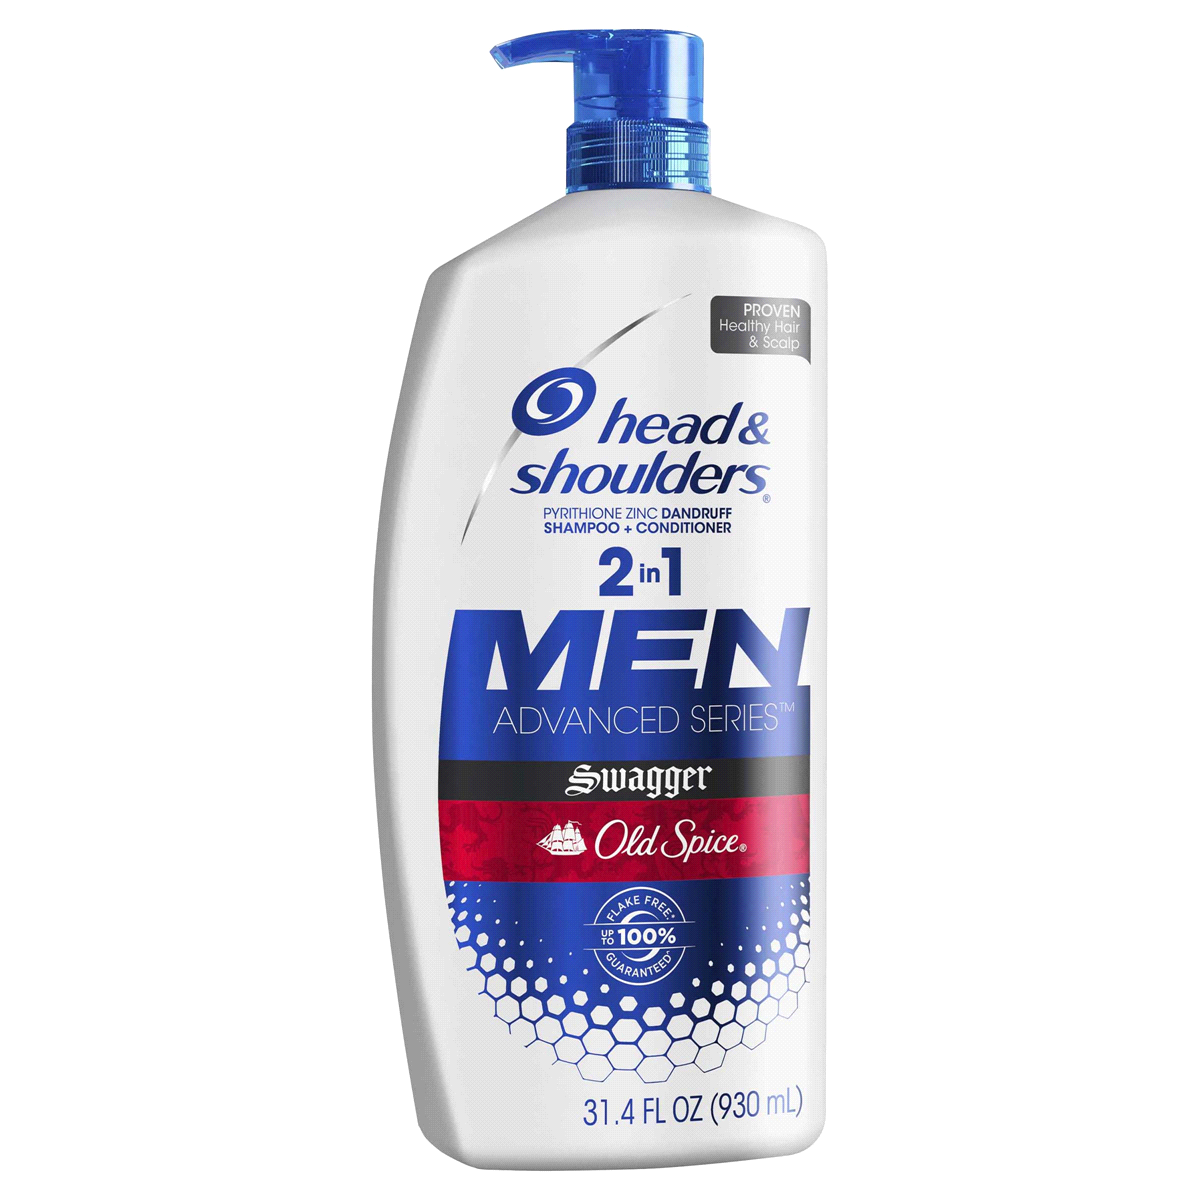 slide 1 of 1, Head & Shoulders Old Spice Swagger Dandruff 2 in 1 Shampoo and Conditioner, 31.4 fl oz